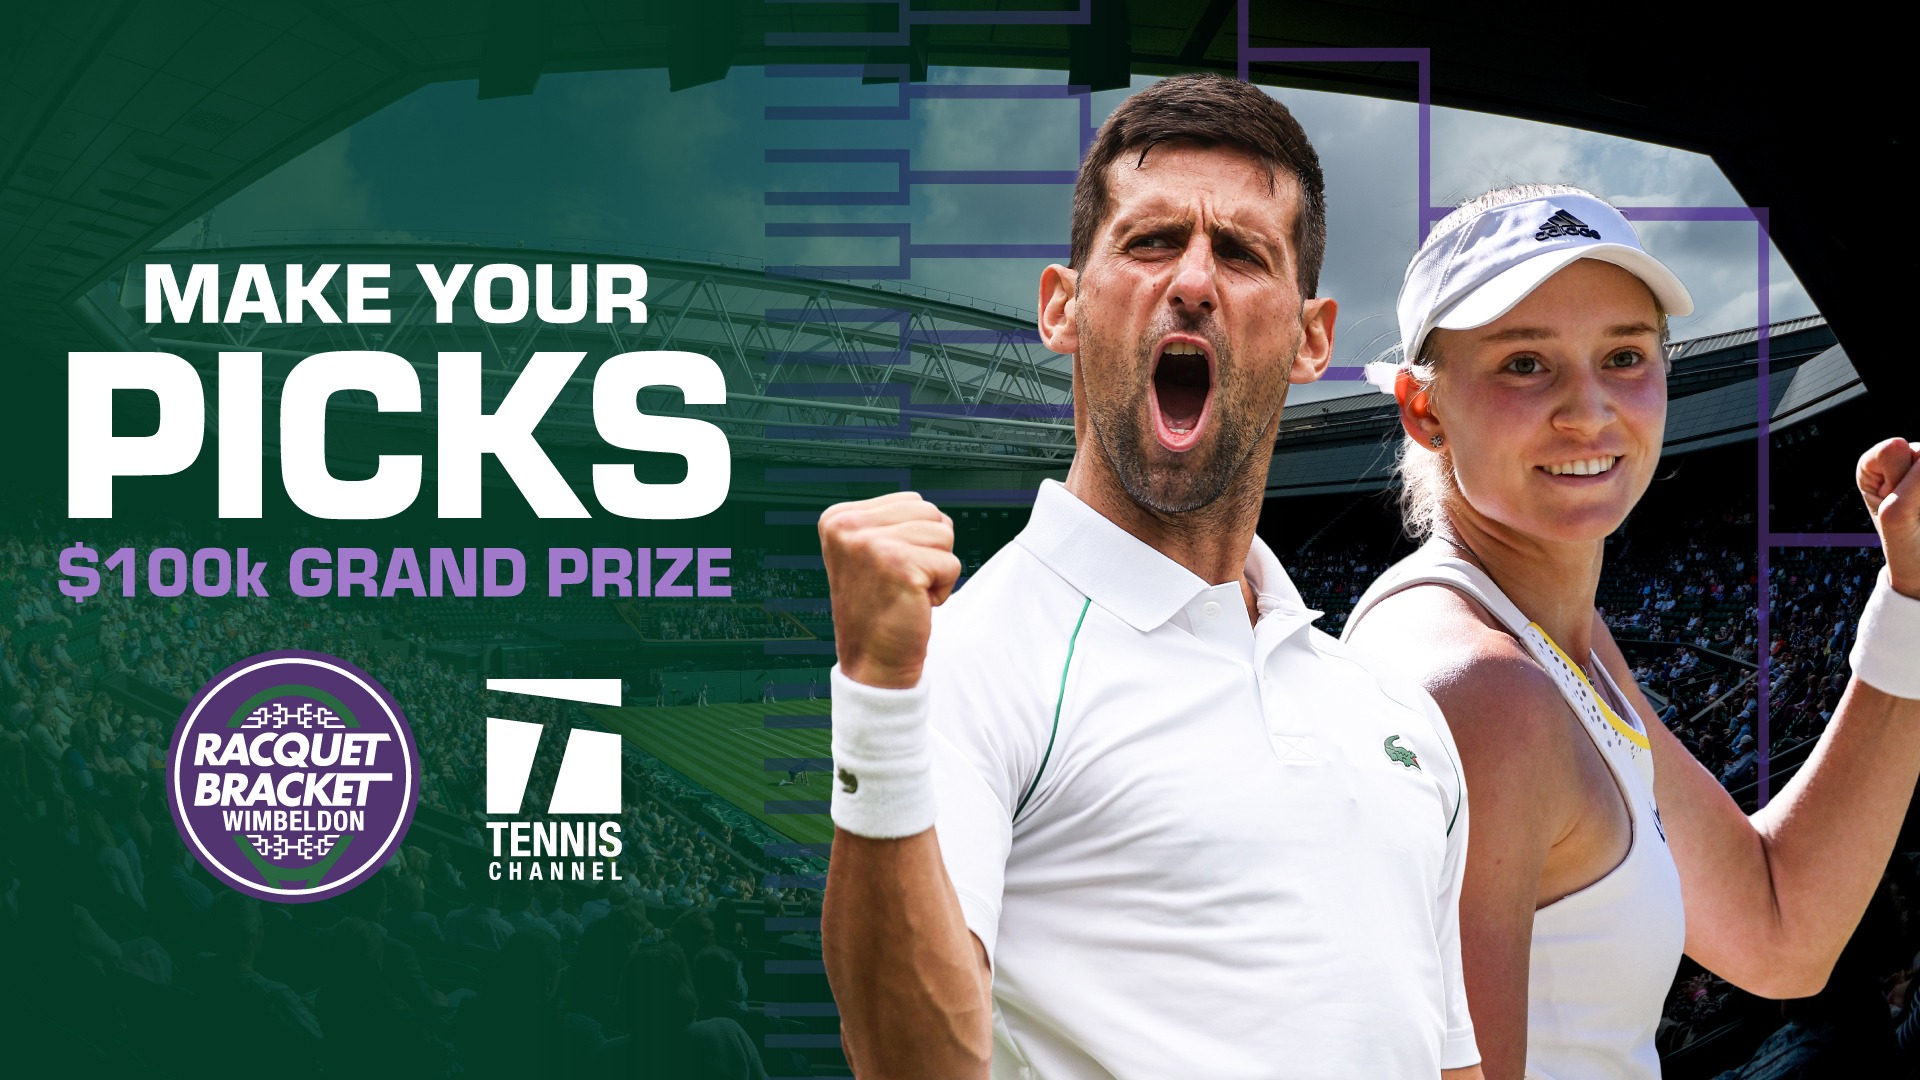 Racquet Bracket, Wimbledon edition $100,000 worth of prizes is up for grabs!